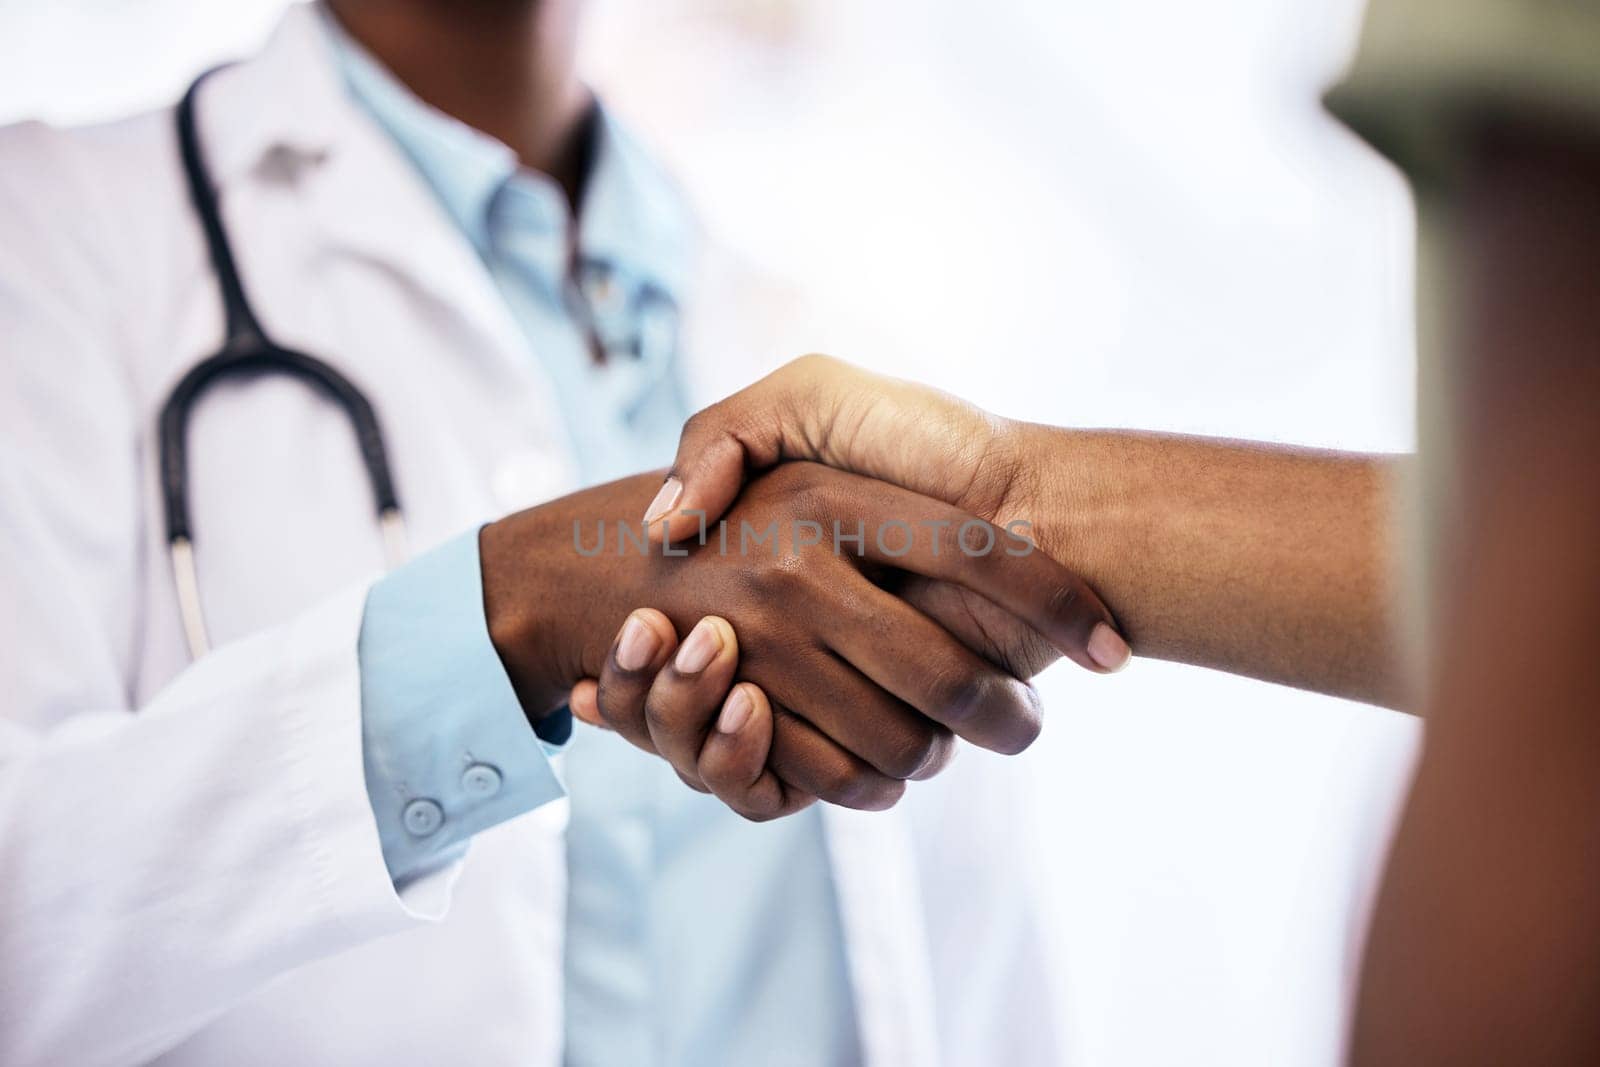 Handshake, welcome and a doctor meeting a patient in the hospital for healthcare, insurance or medical treatment. Medicine, trust or thank you with a health professional shaking hands in a clinic.